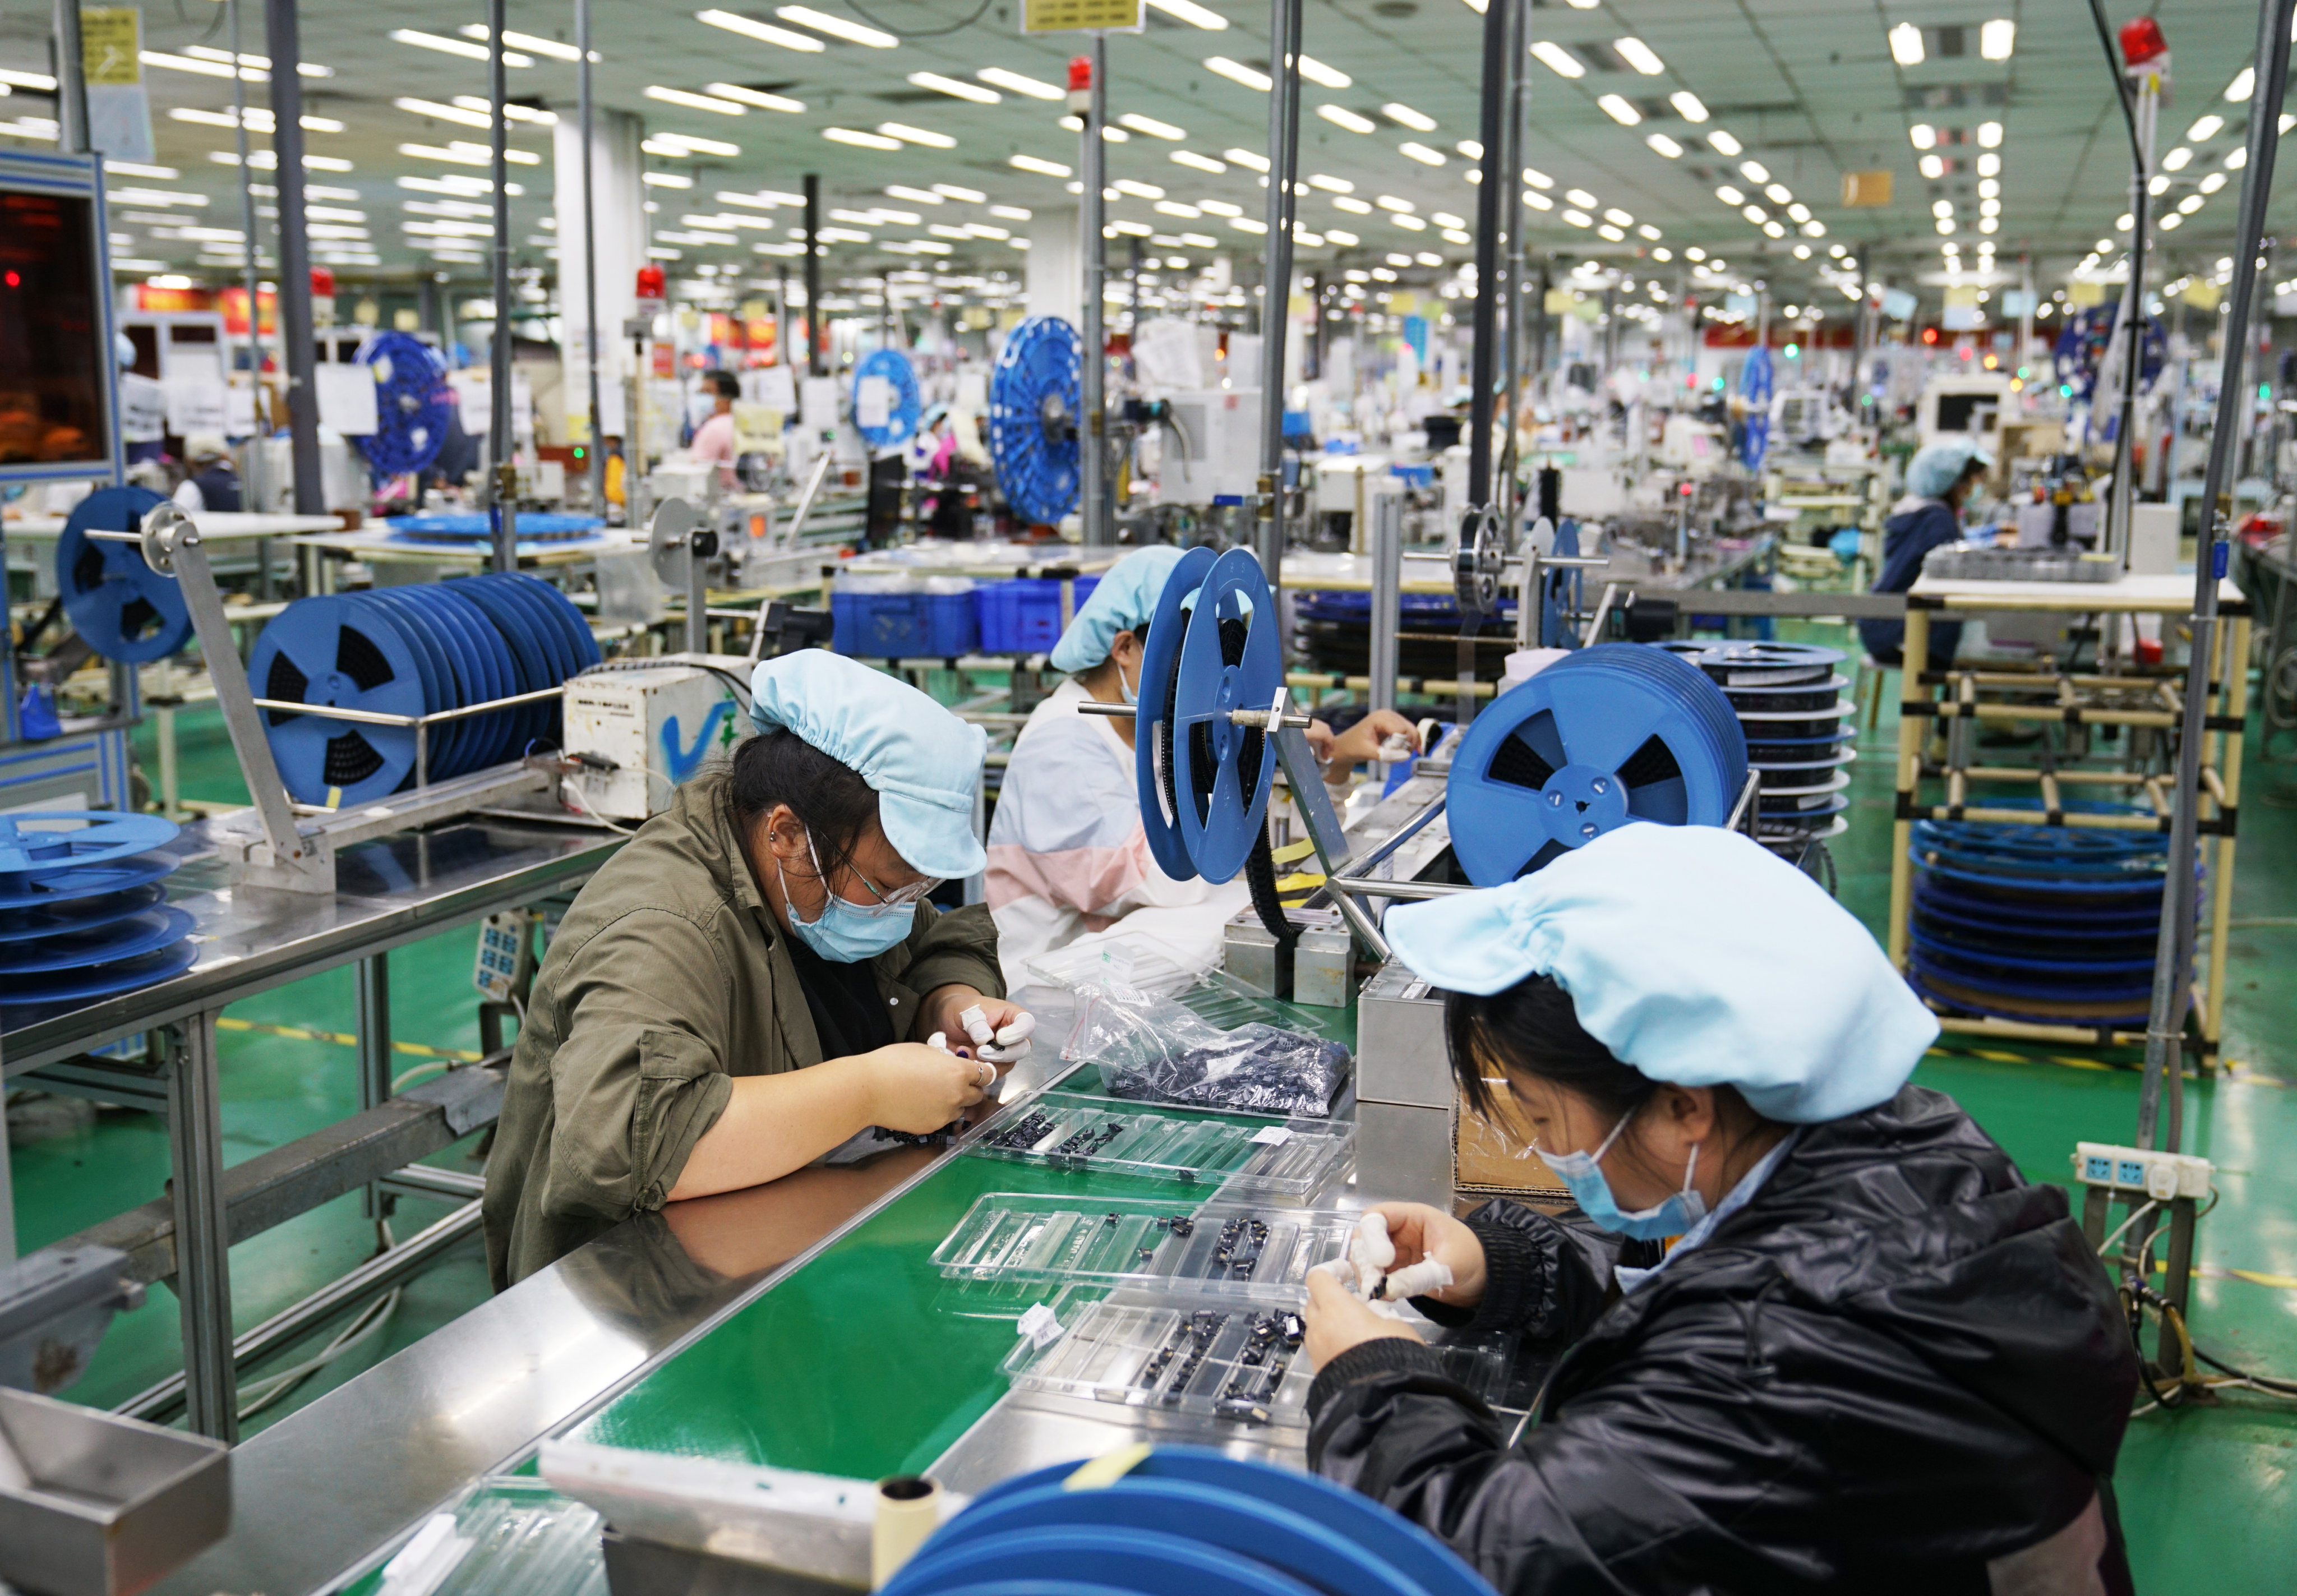 Ex-Chongqing mayor Huang Qifan said Chinese suppliers received a quarter of the gross profits from Apple outsourcing iPhone assembly to China. Photo: VCG via Getty Images